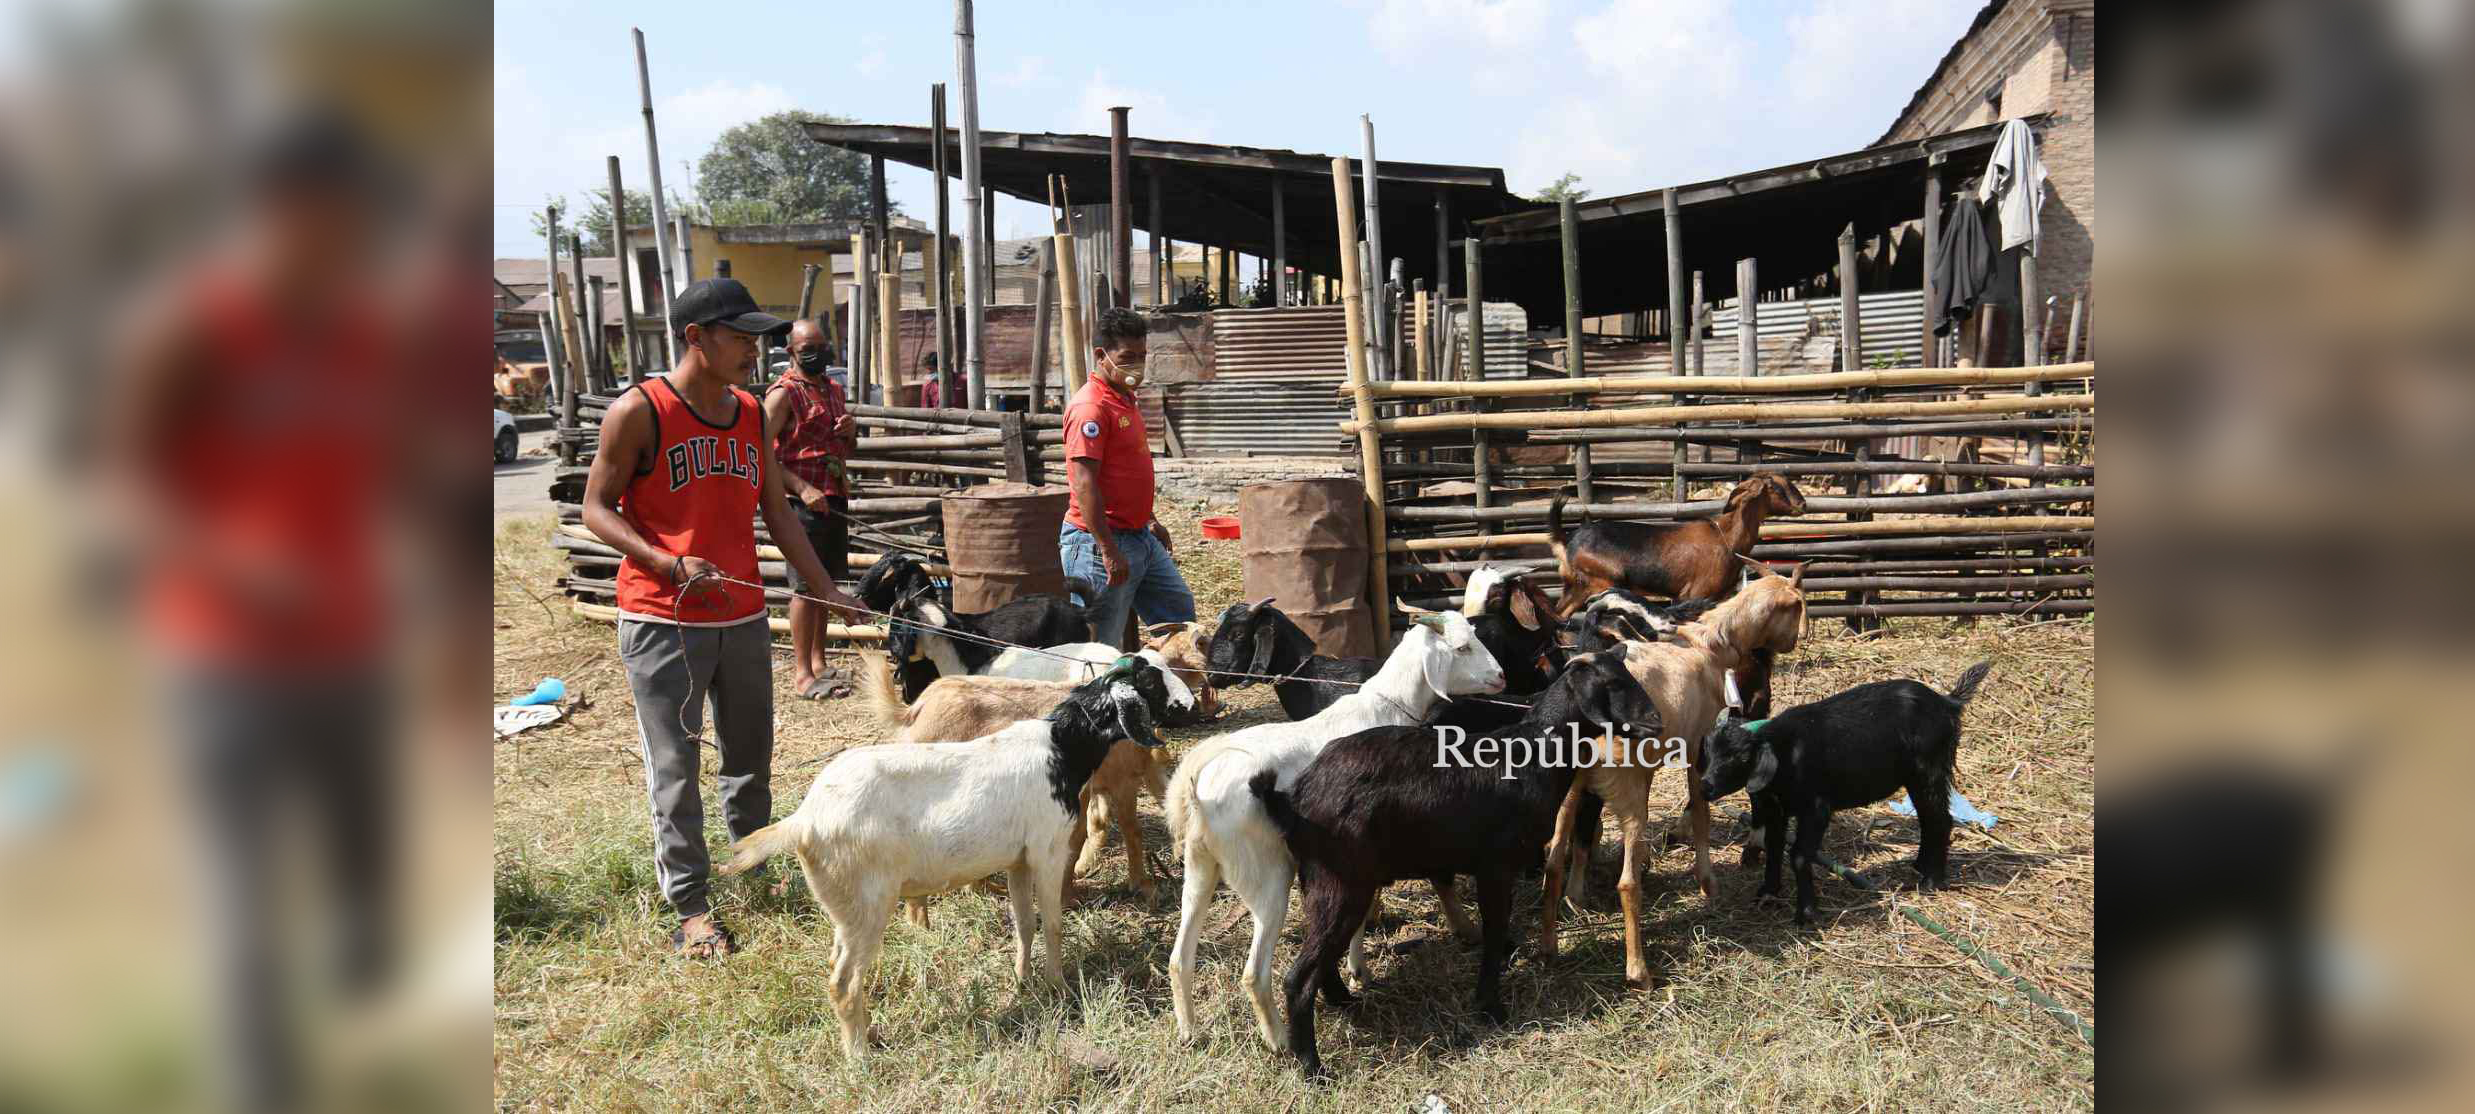 Govt body starts color-coding on livestock for health checks to ensure safe consumption during Dashain